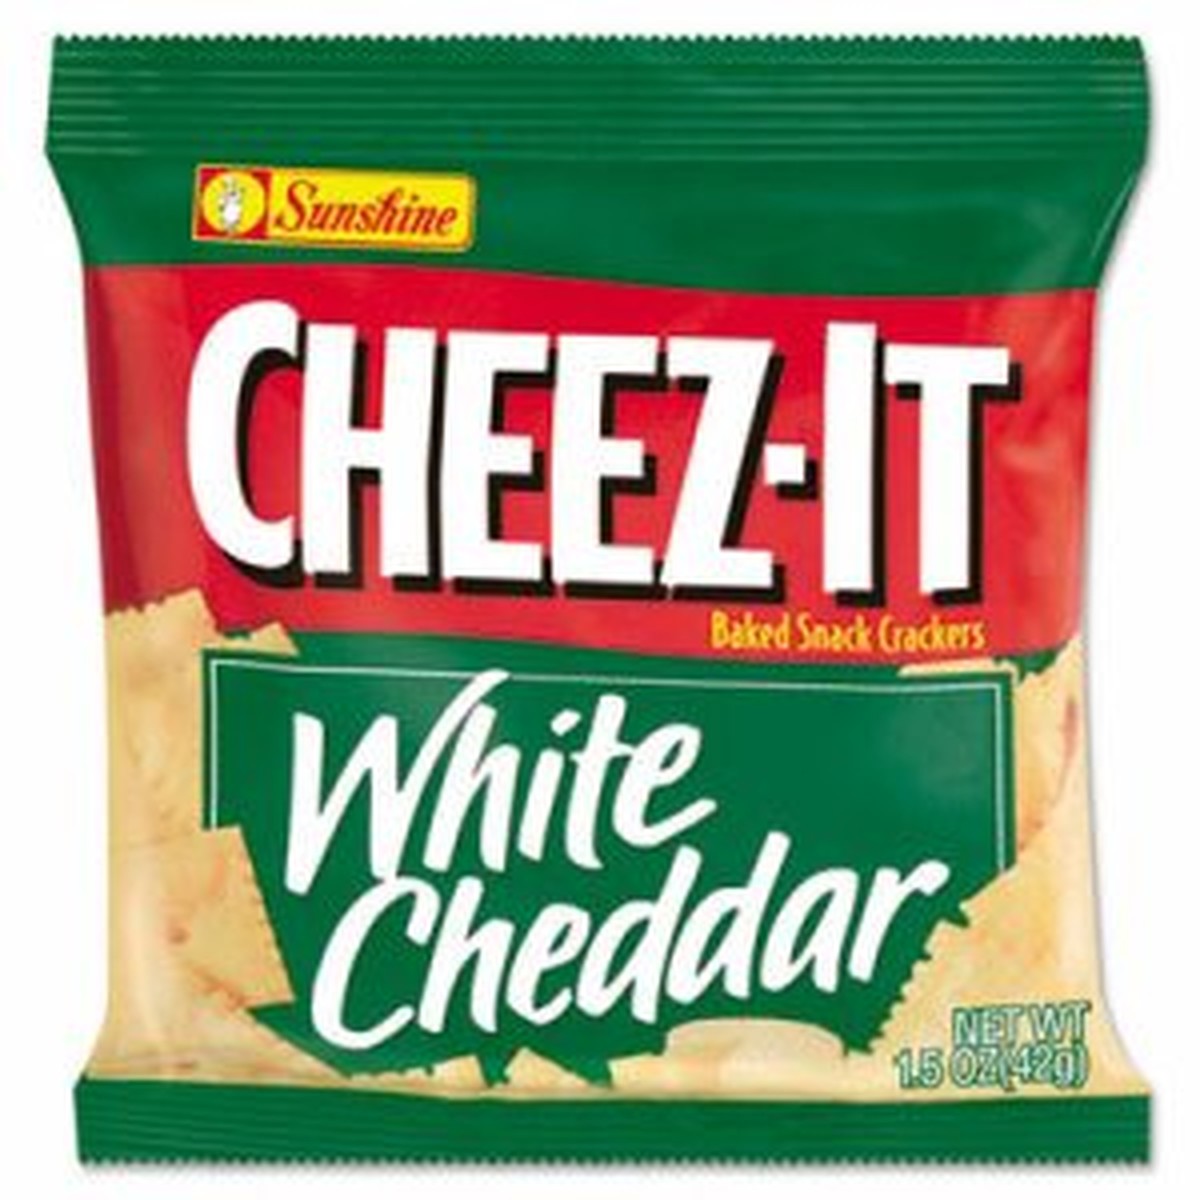 Cheez-It Crackers, 1.5oz Single-Serving Snack Bags, White Cheddar, 8/Box